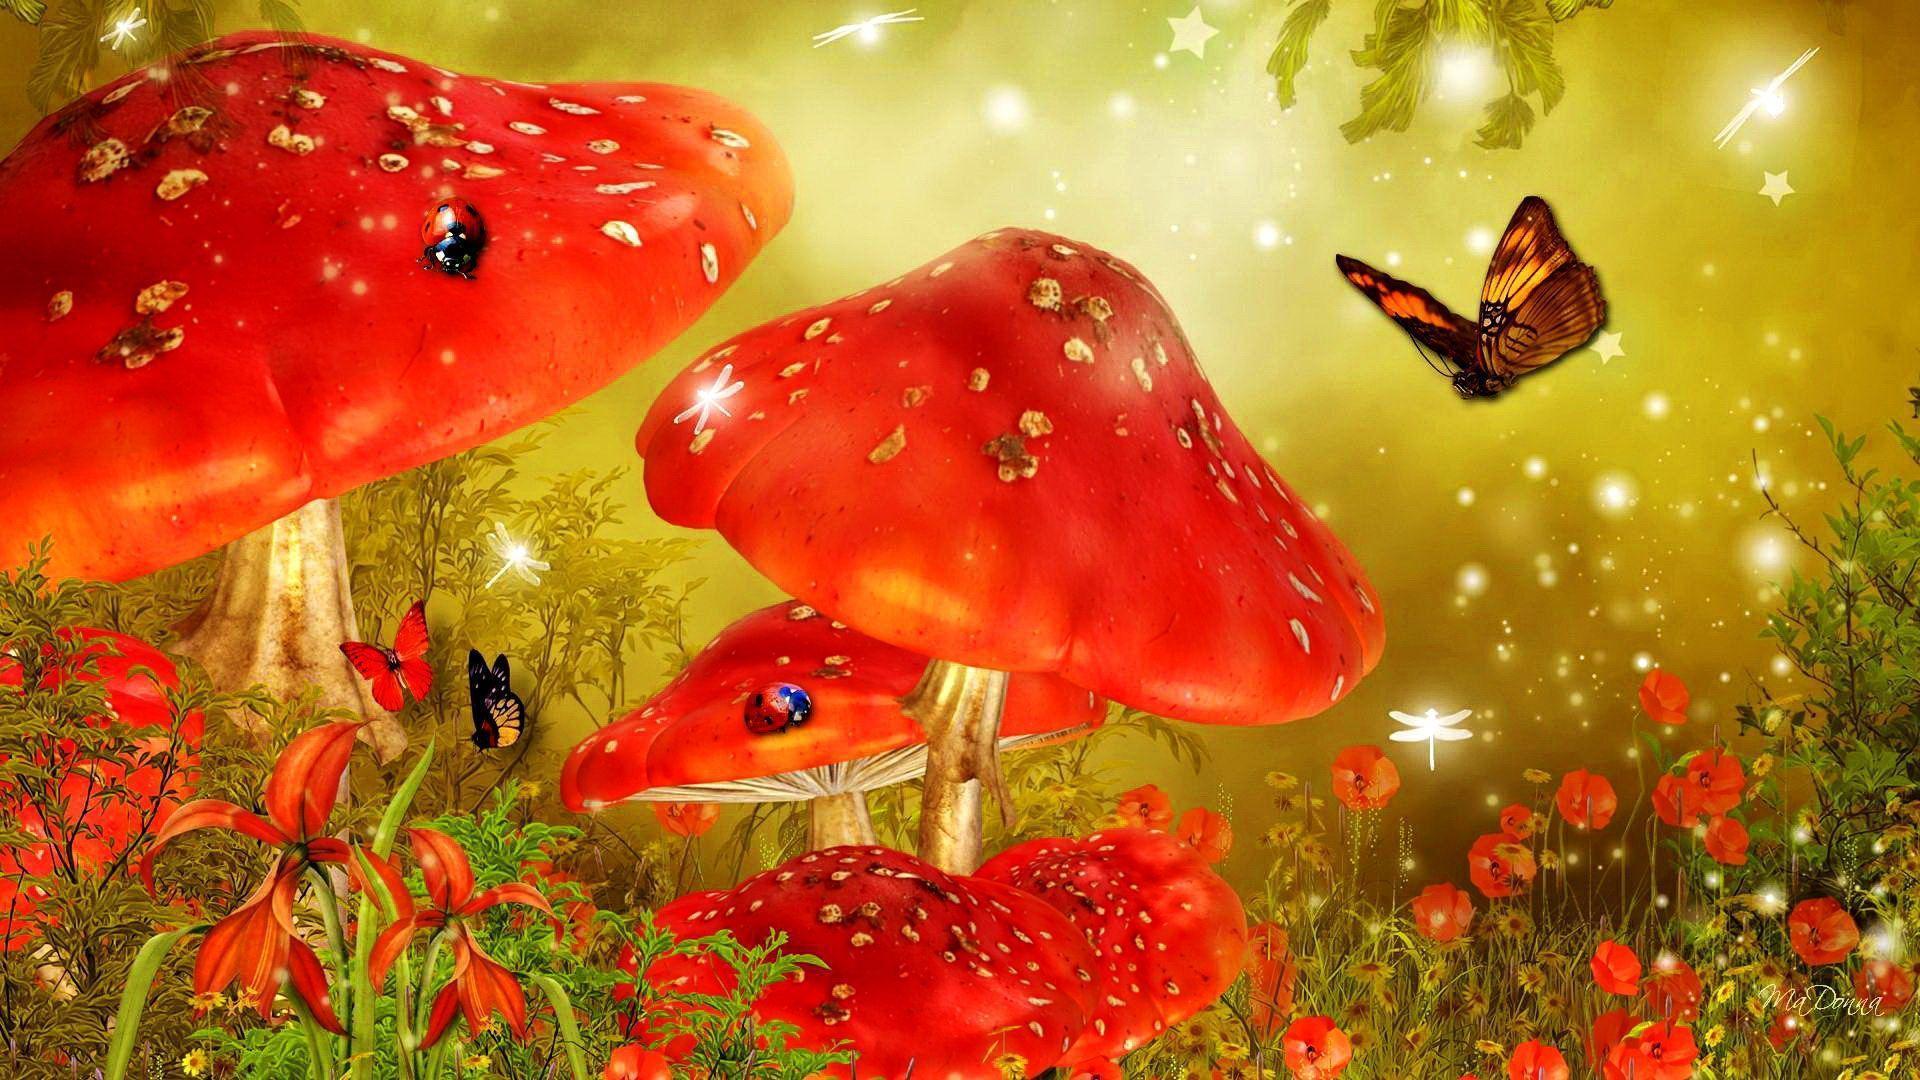 fairytale forest wallpaper Search Engine